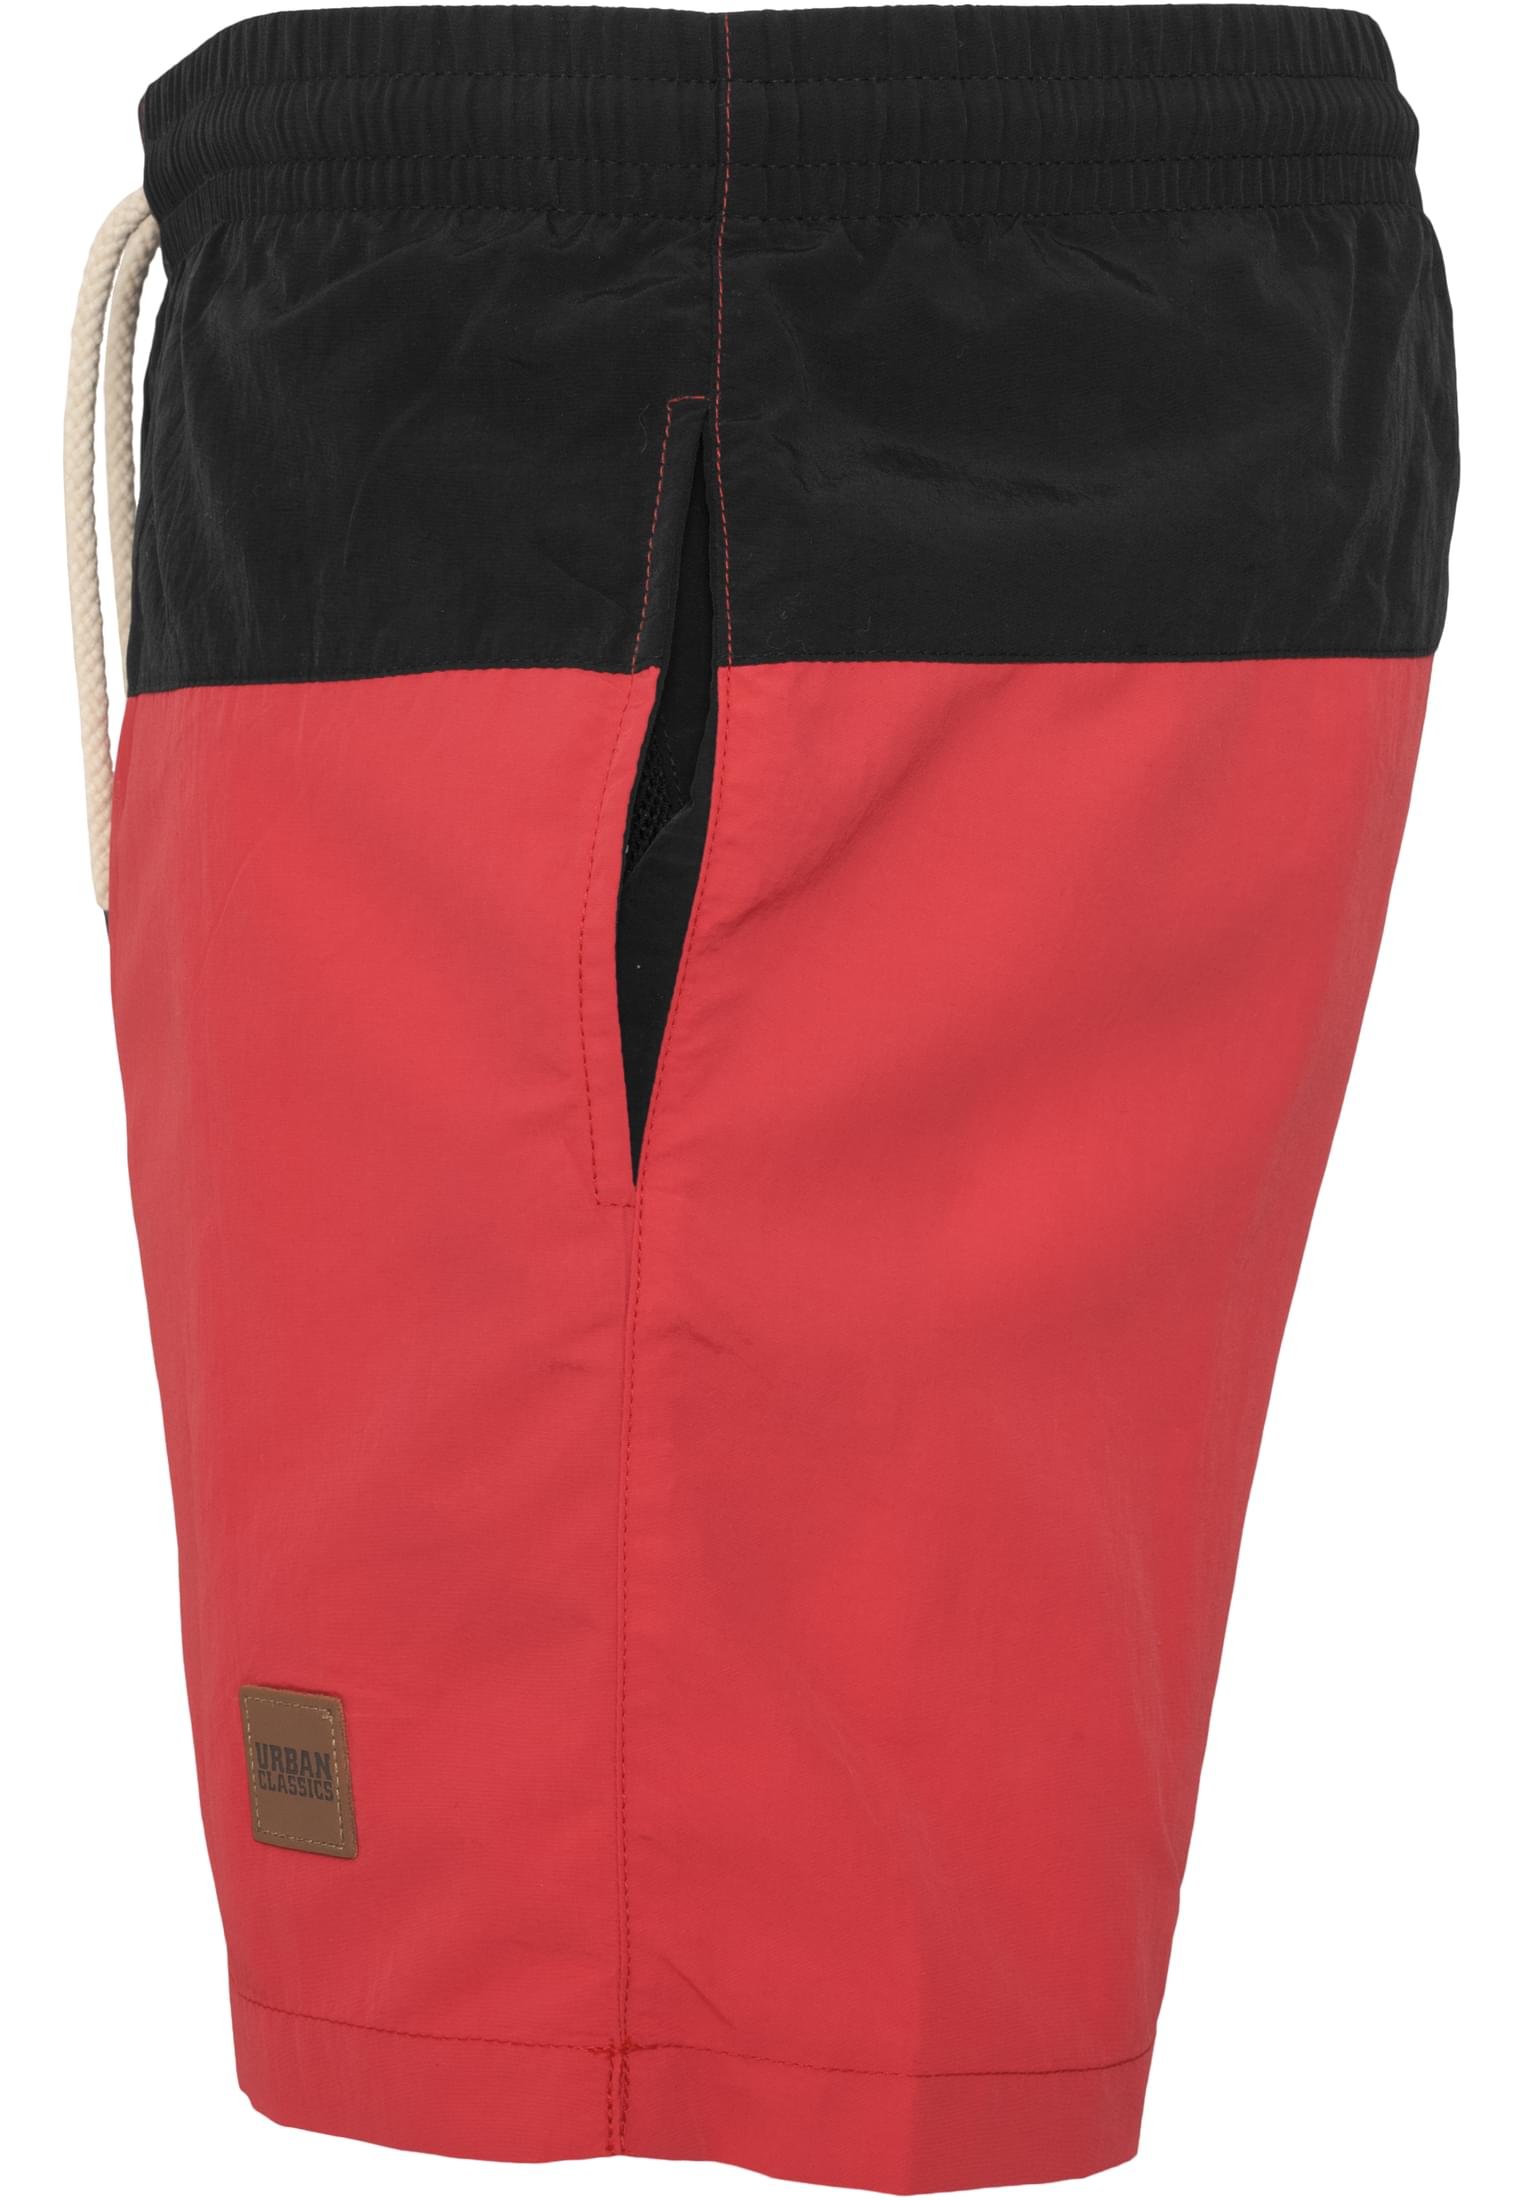 Plus Size Block Swim Shorts in Farbe blk/red